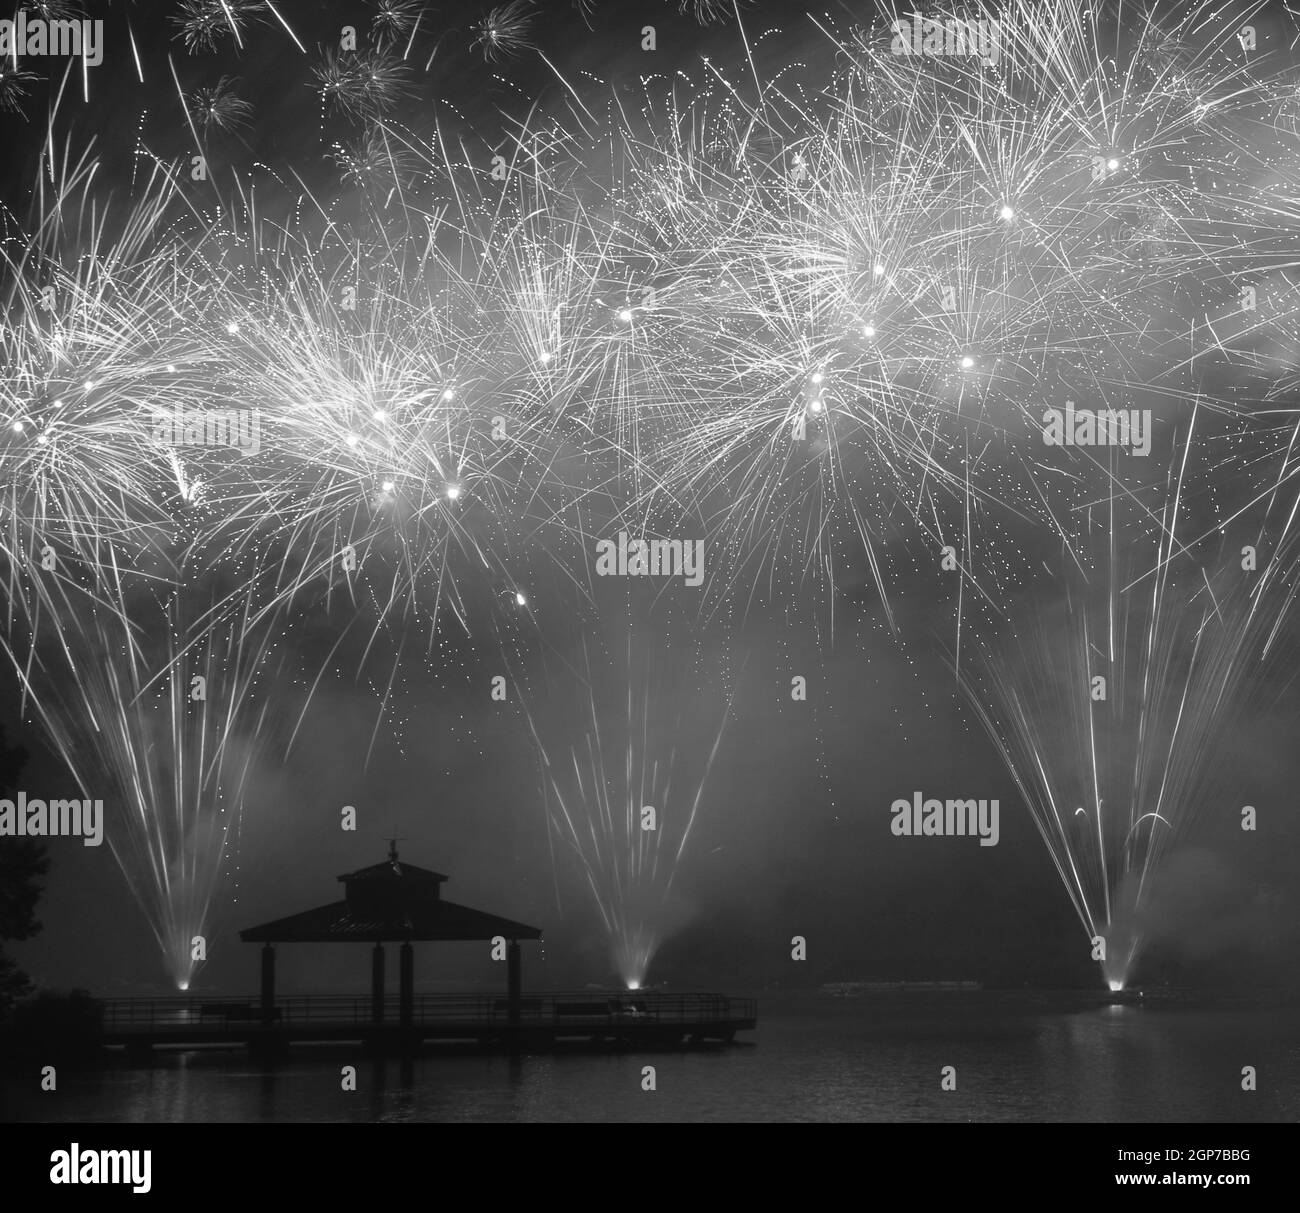 Fireworks at Delco Park. Fishing pier and pavilion silhouette in foreground of ground display fireworks. Converted to black and white. Delco Park, Ket Stock Photo